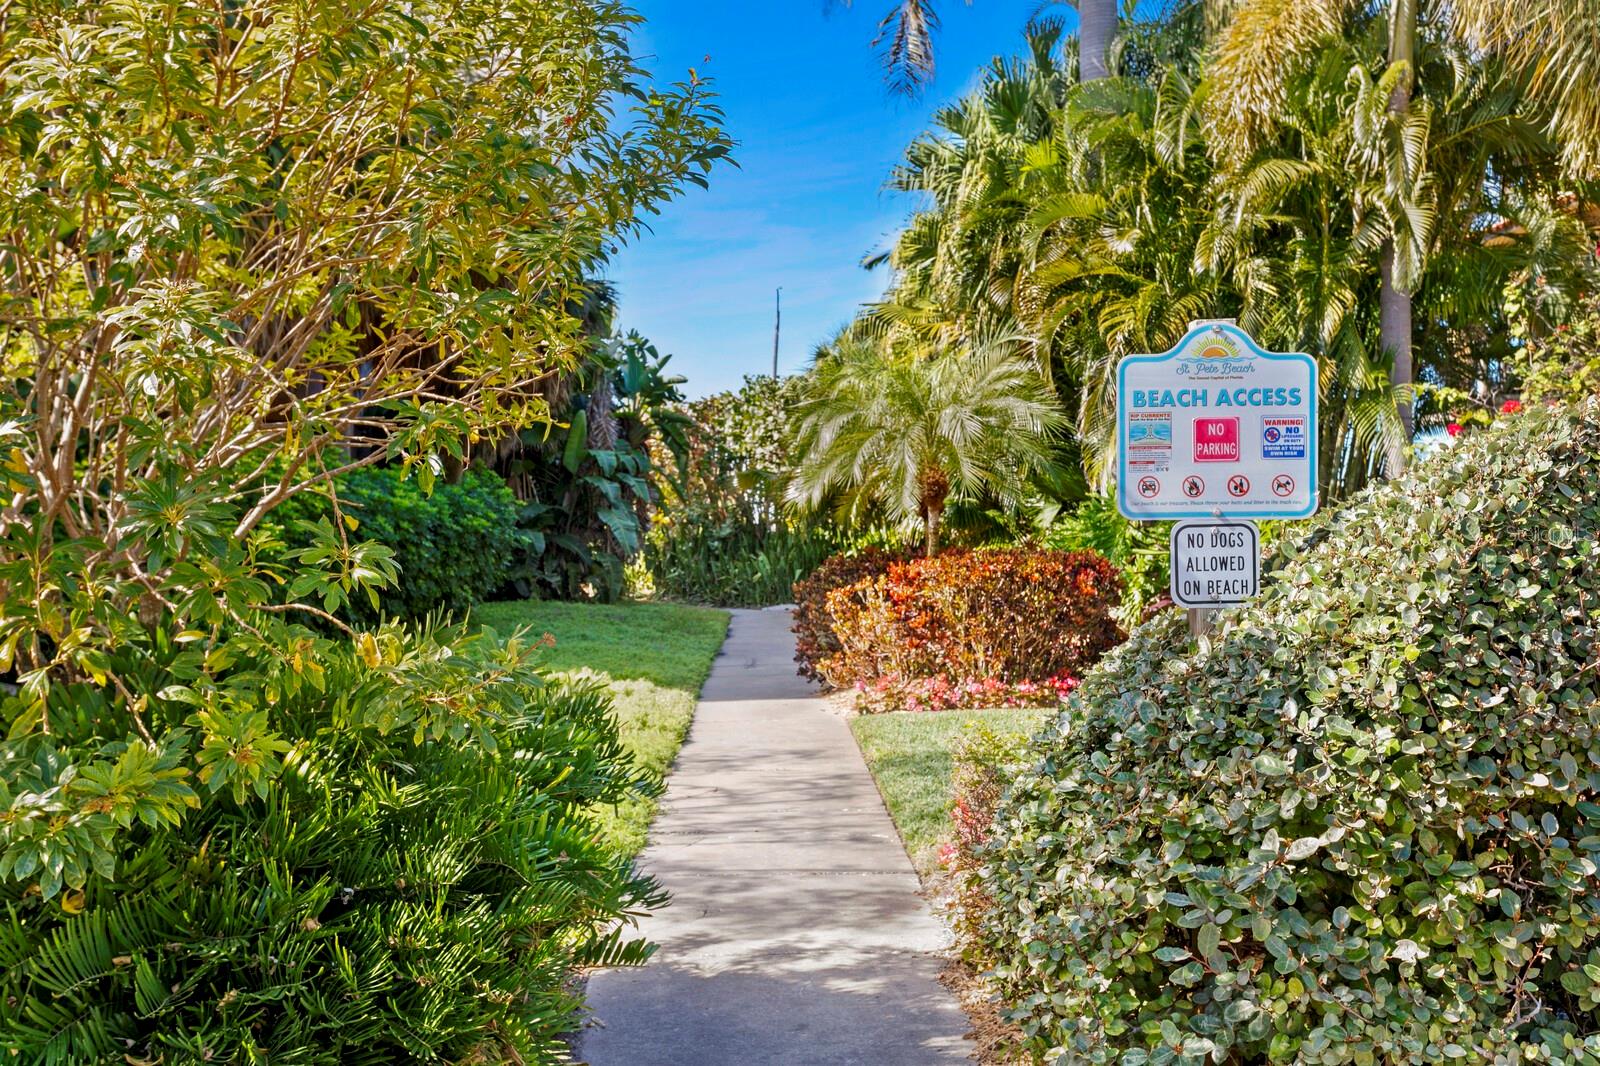 90 seconds to Beach Access on same street